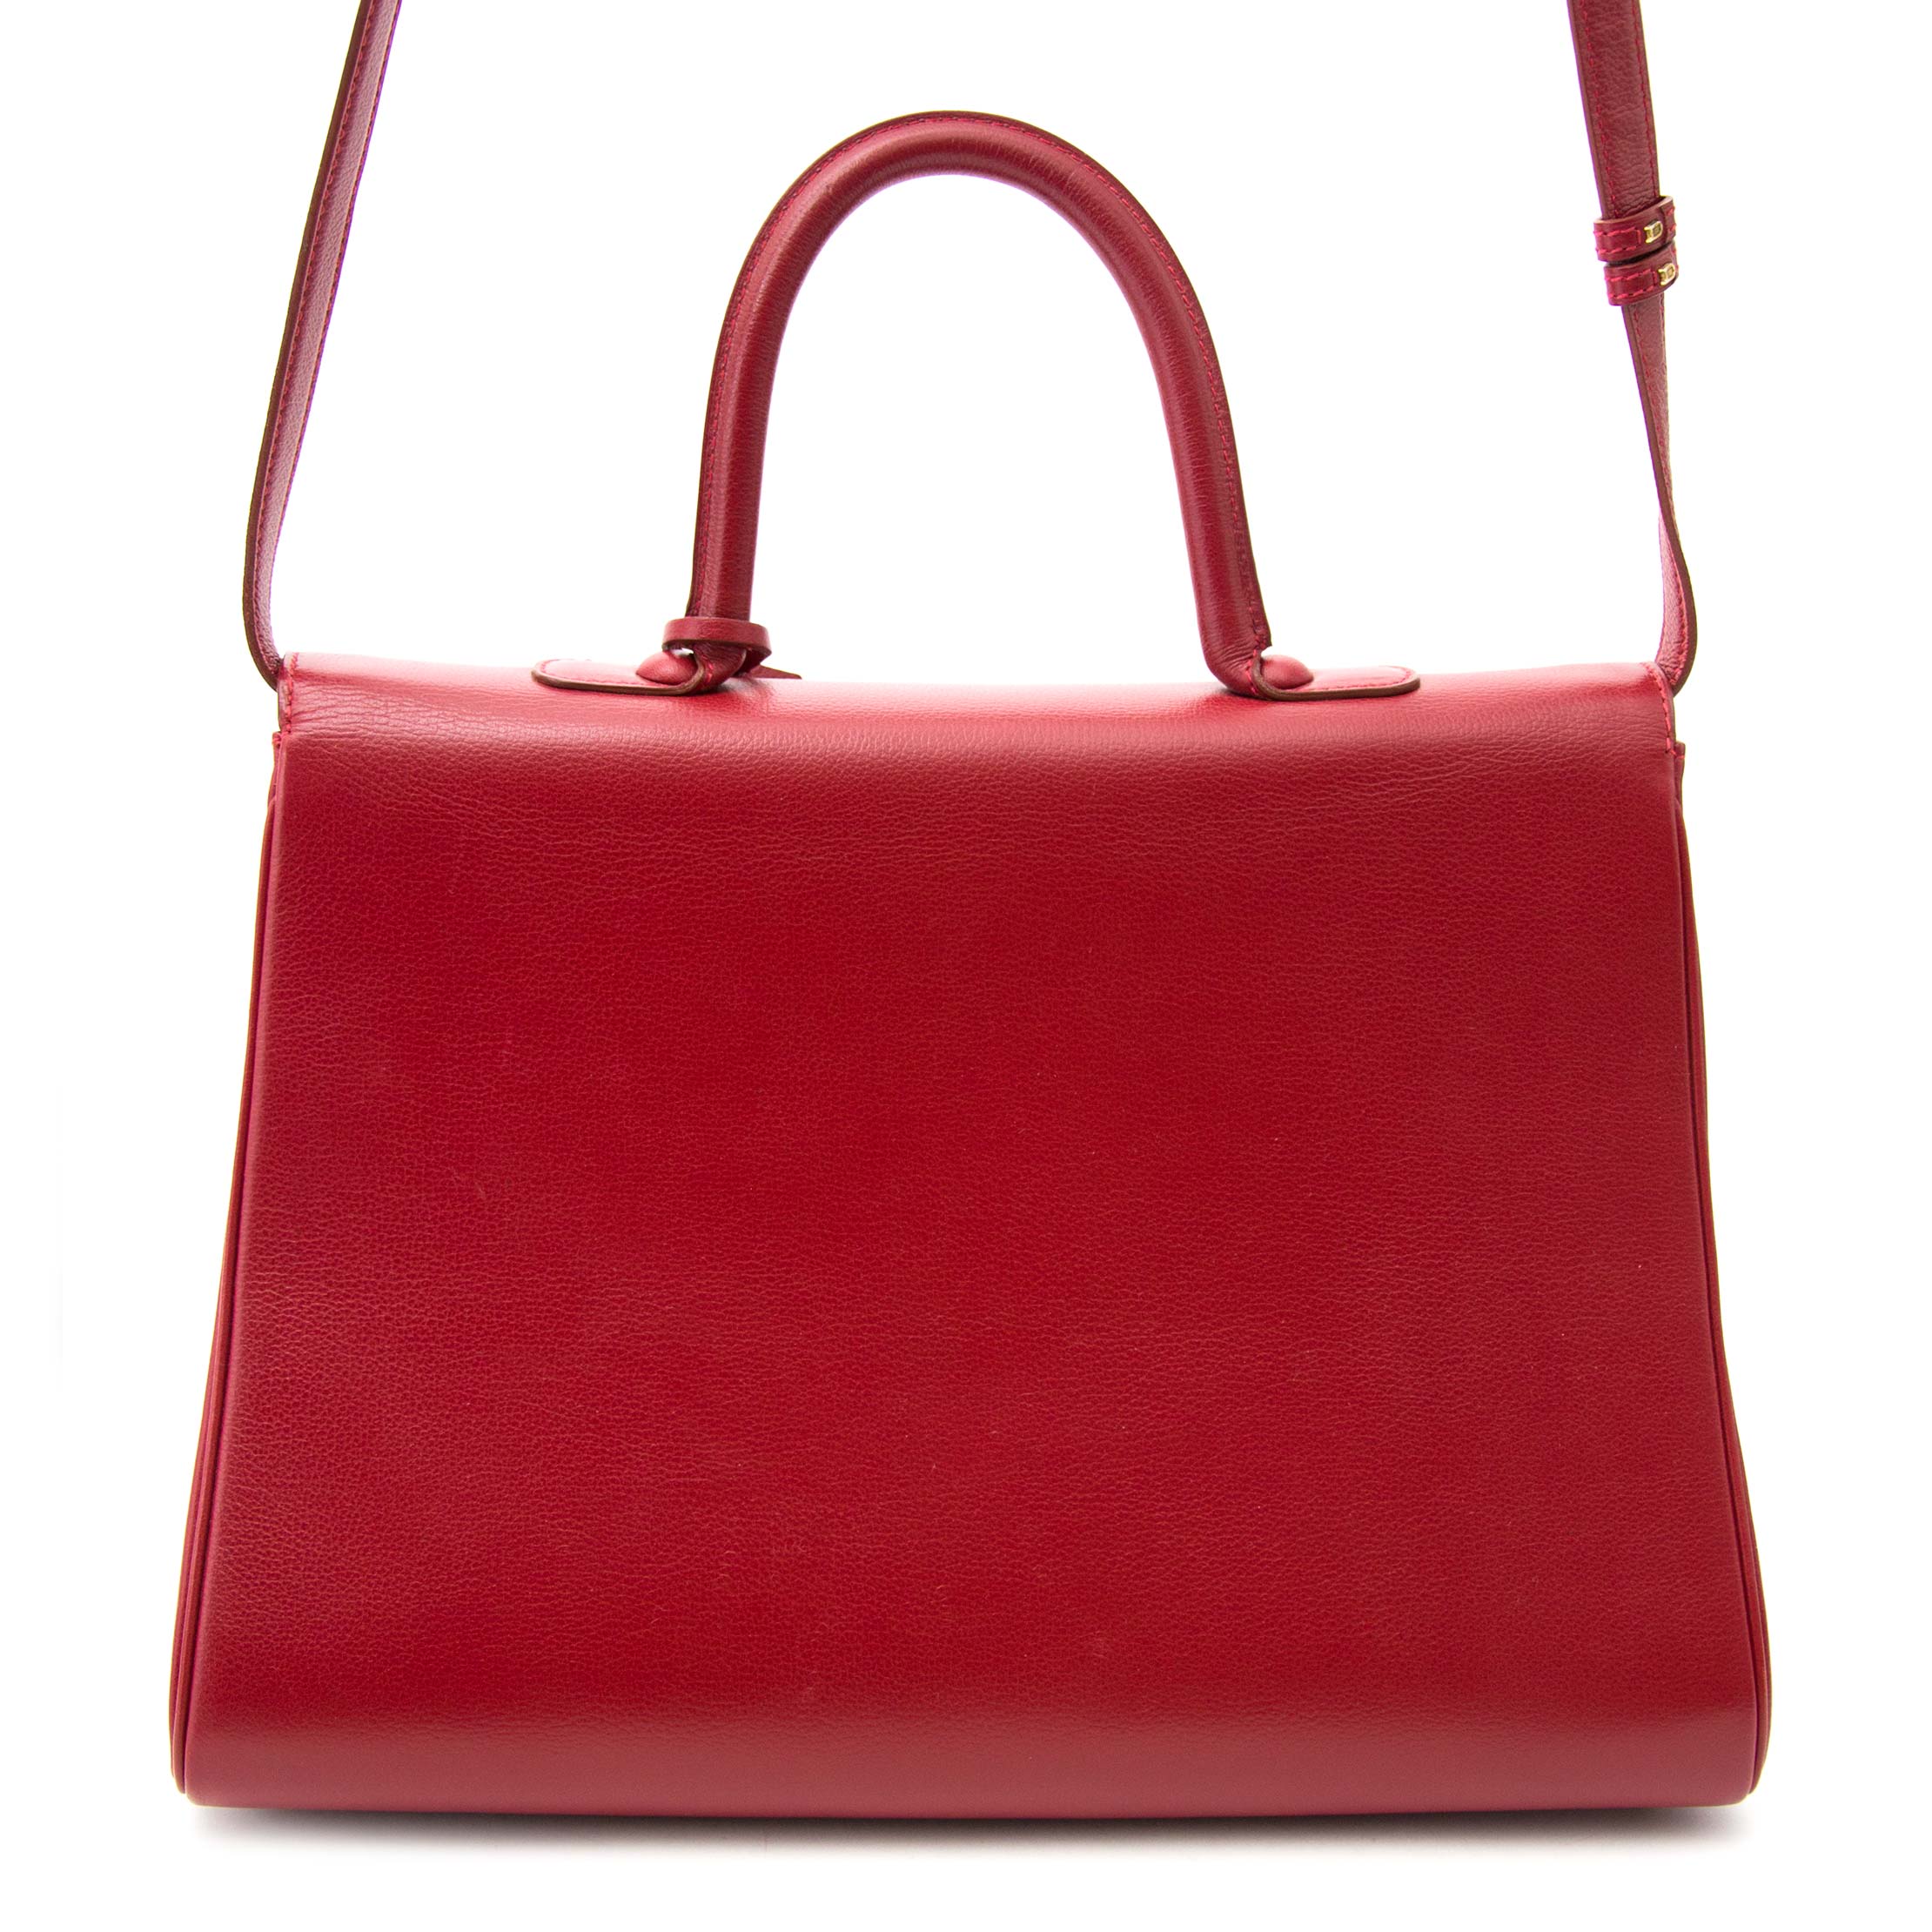 LABELLOV - Make heads turn with this stunning vibrant red Delvaux